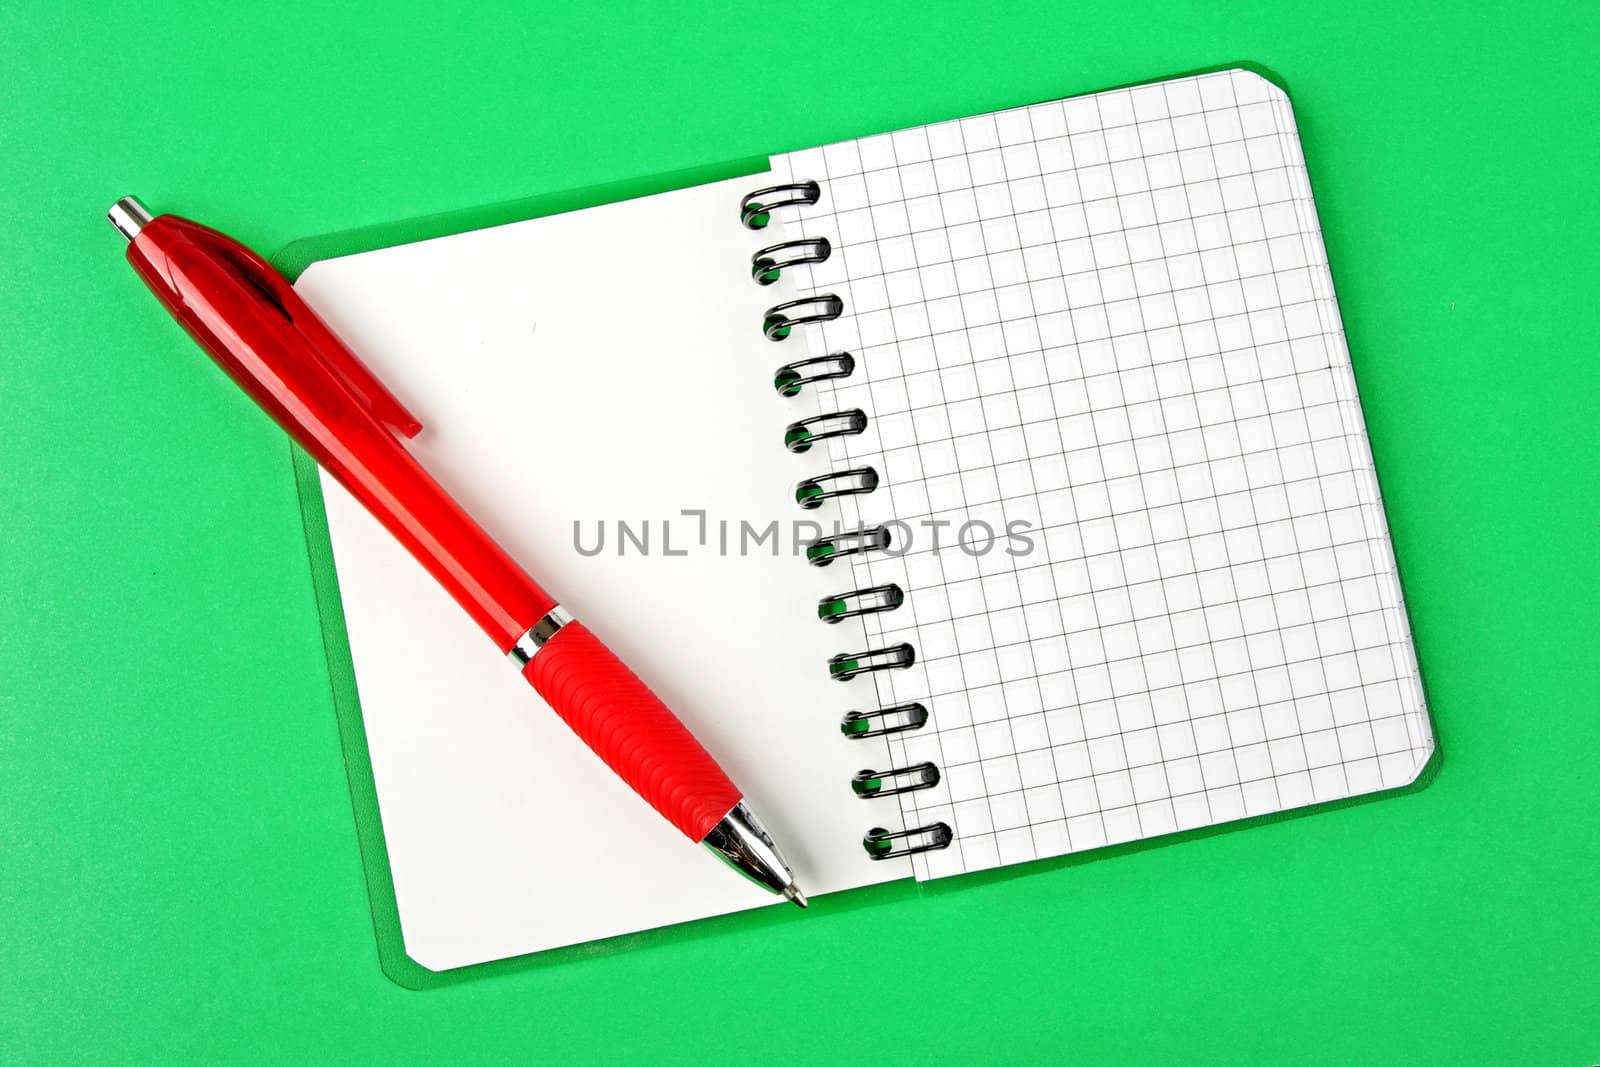 Opened notebook squared pagewith red pen over it on green backgr by Verdateo